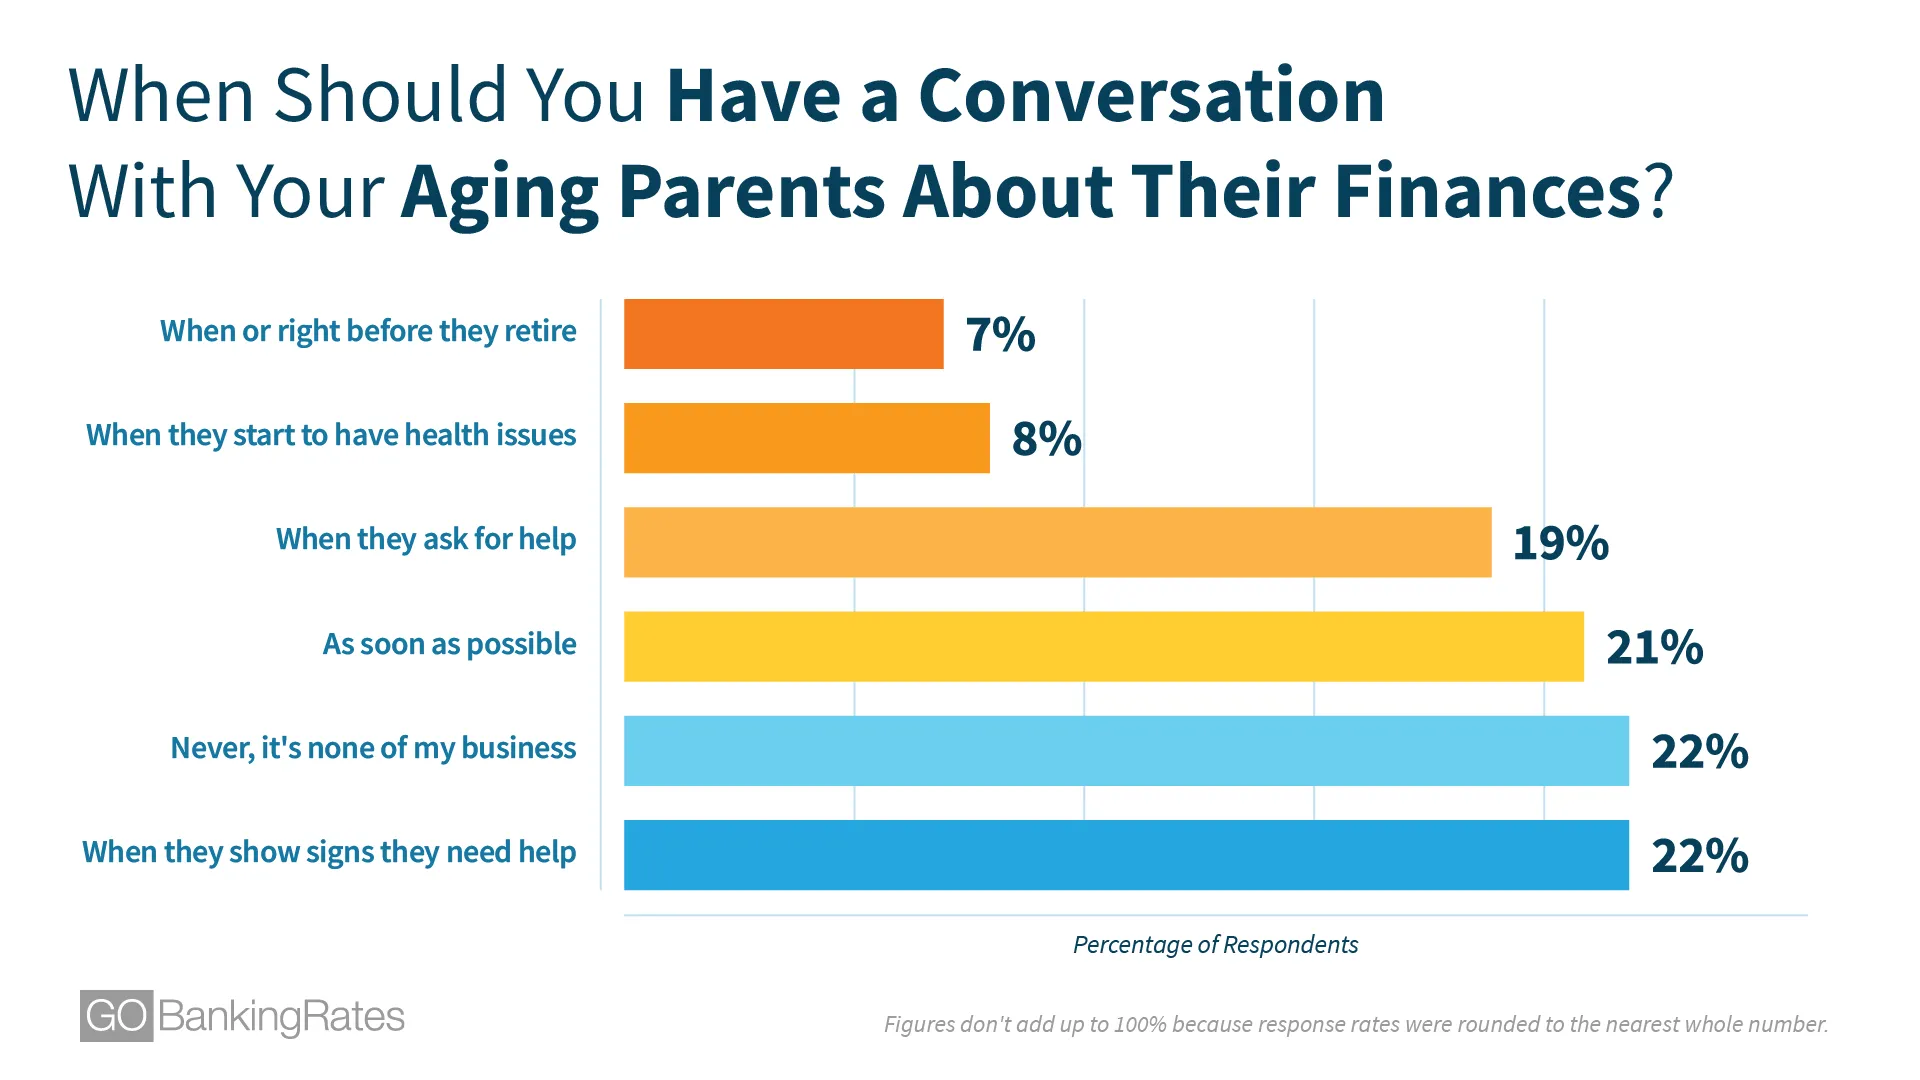 When Should You Have a Conversation With Your Aging Parents About Their Finances?